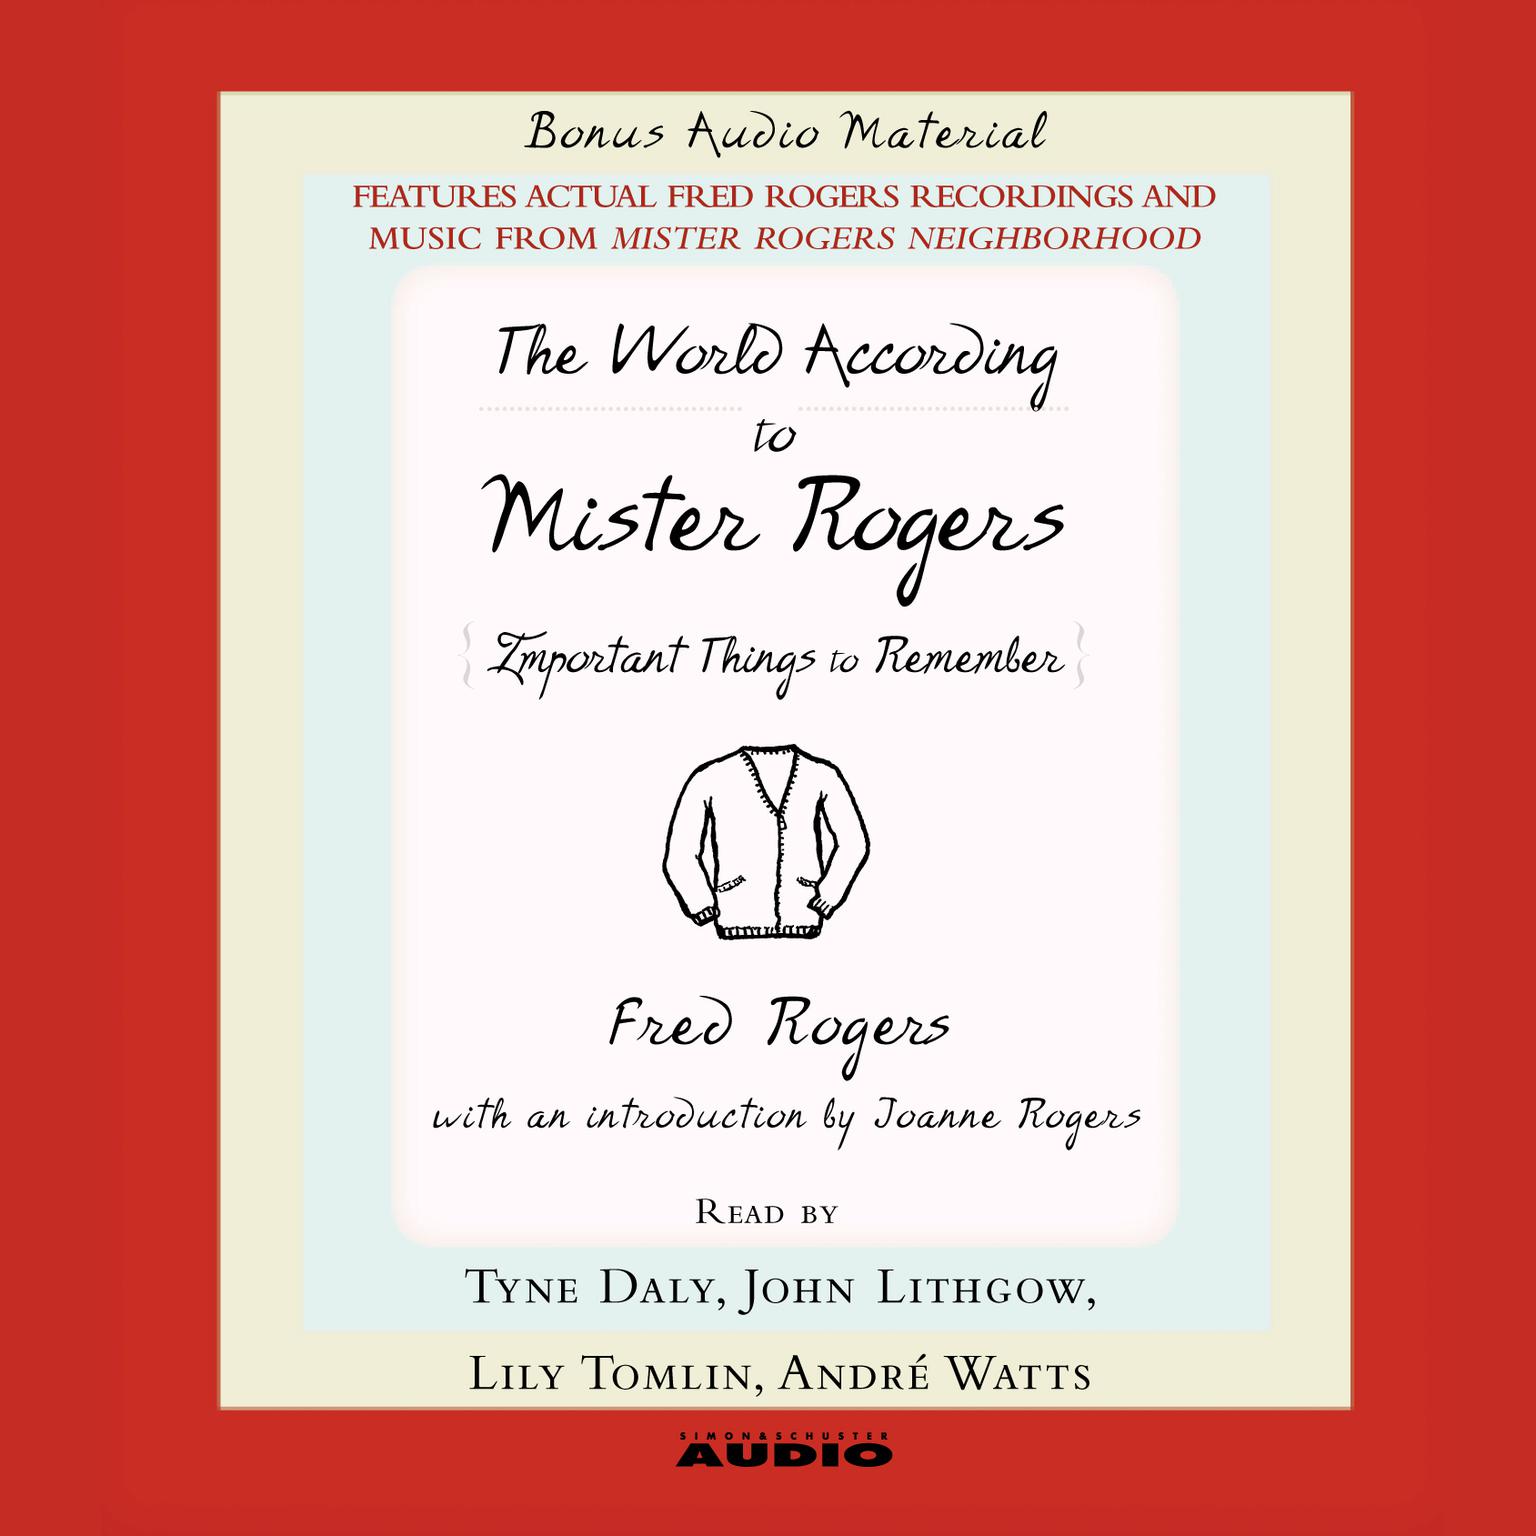 The World according to Mister Rogers (Abridged): Important Things to Remember Audiobook, by Fred Rogers